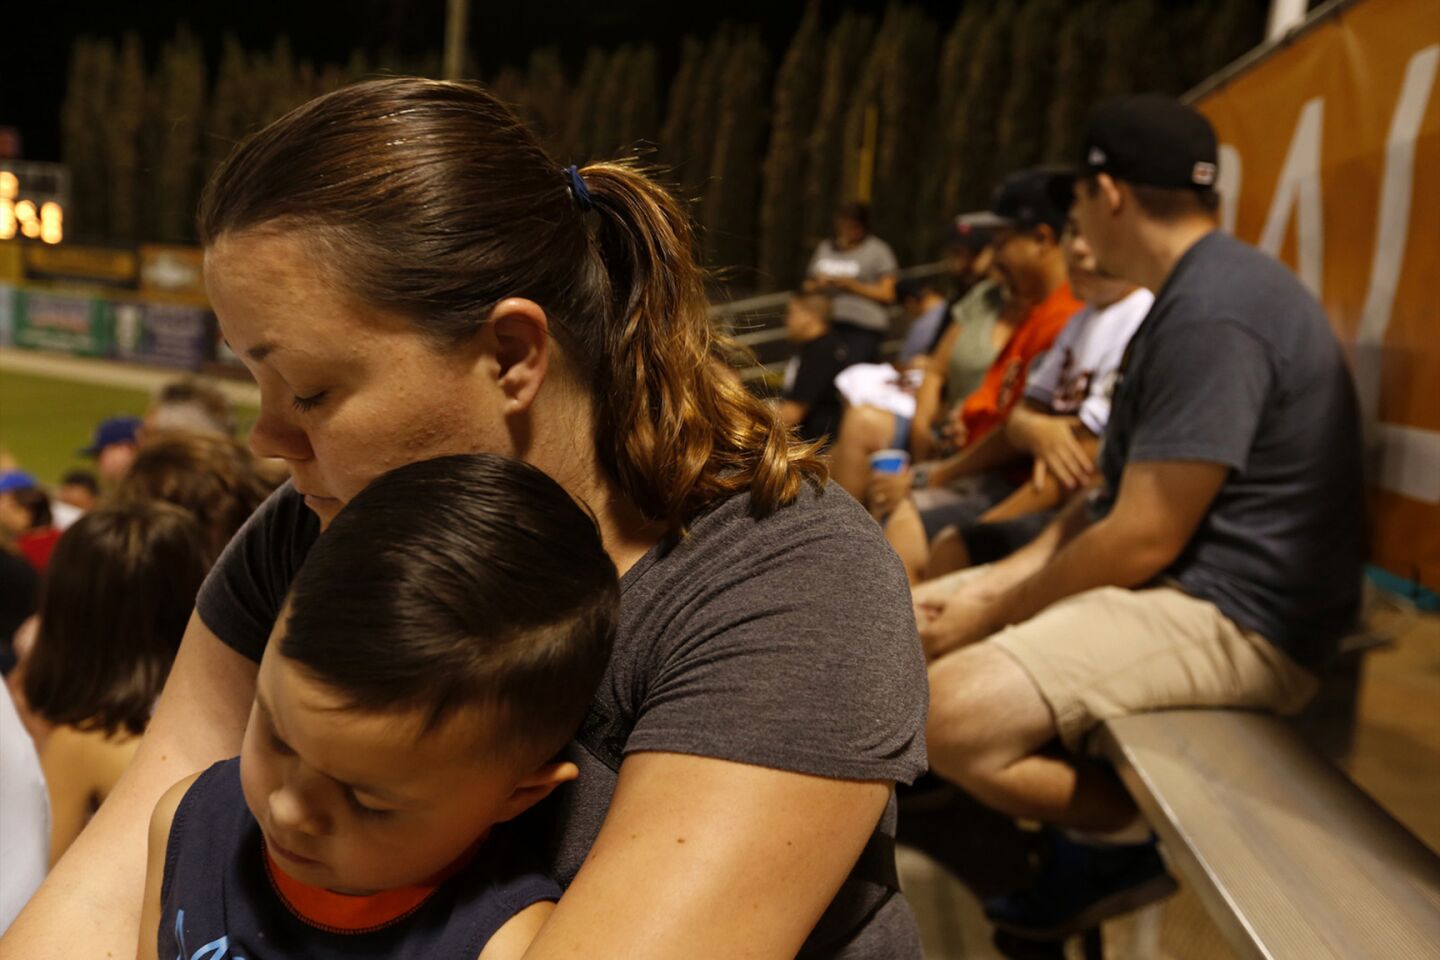 "We're very disappointed," said Lacy Ayala, 25, holding her son Liam, 4, of minor league baseball ending in Bakersfield.